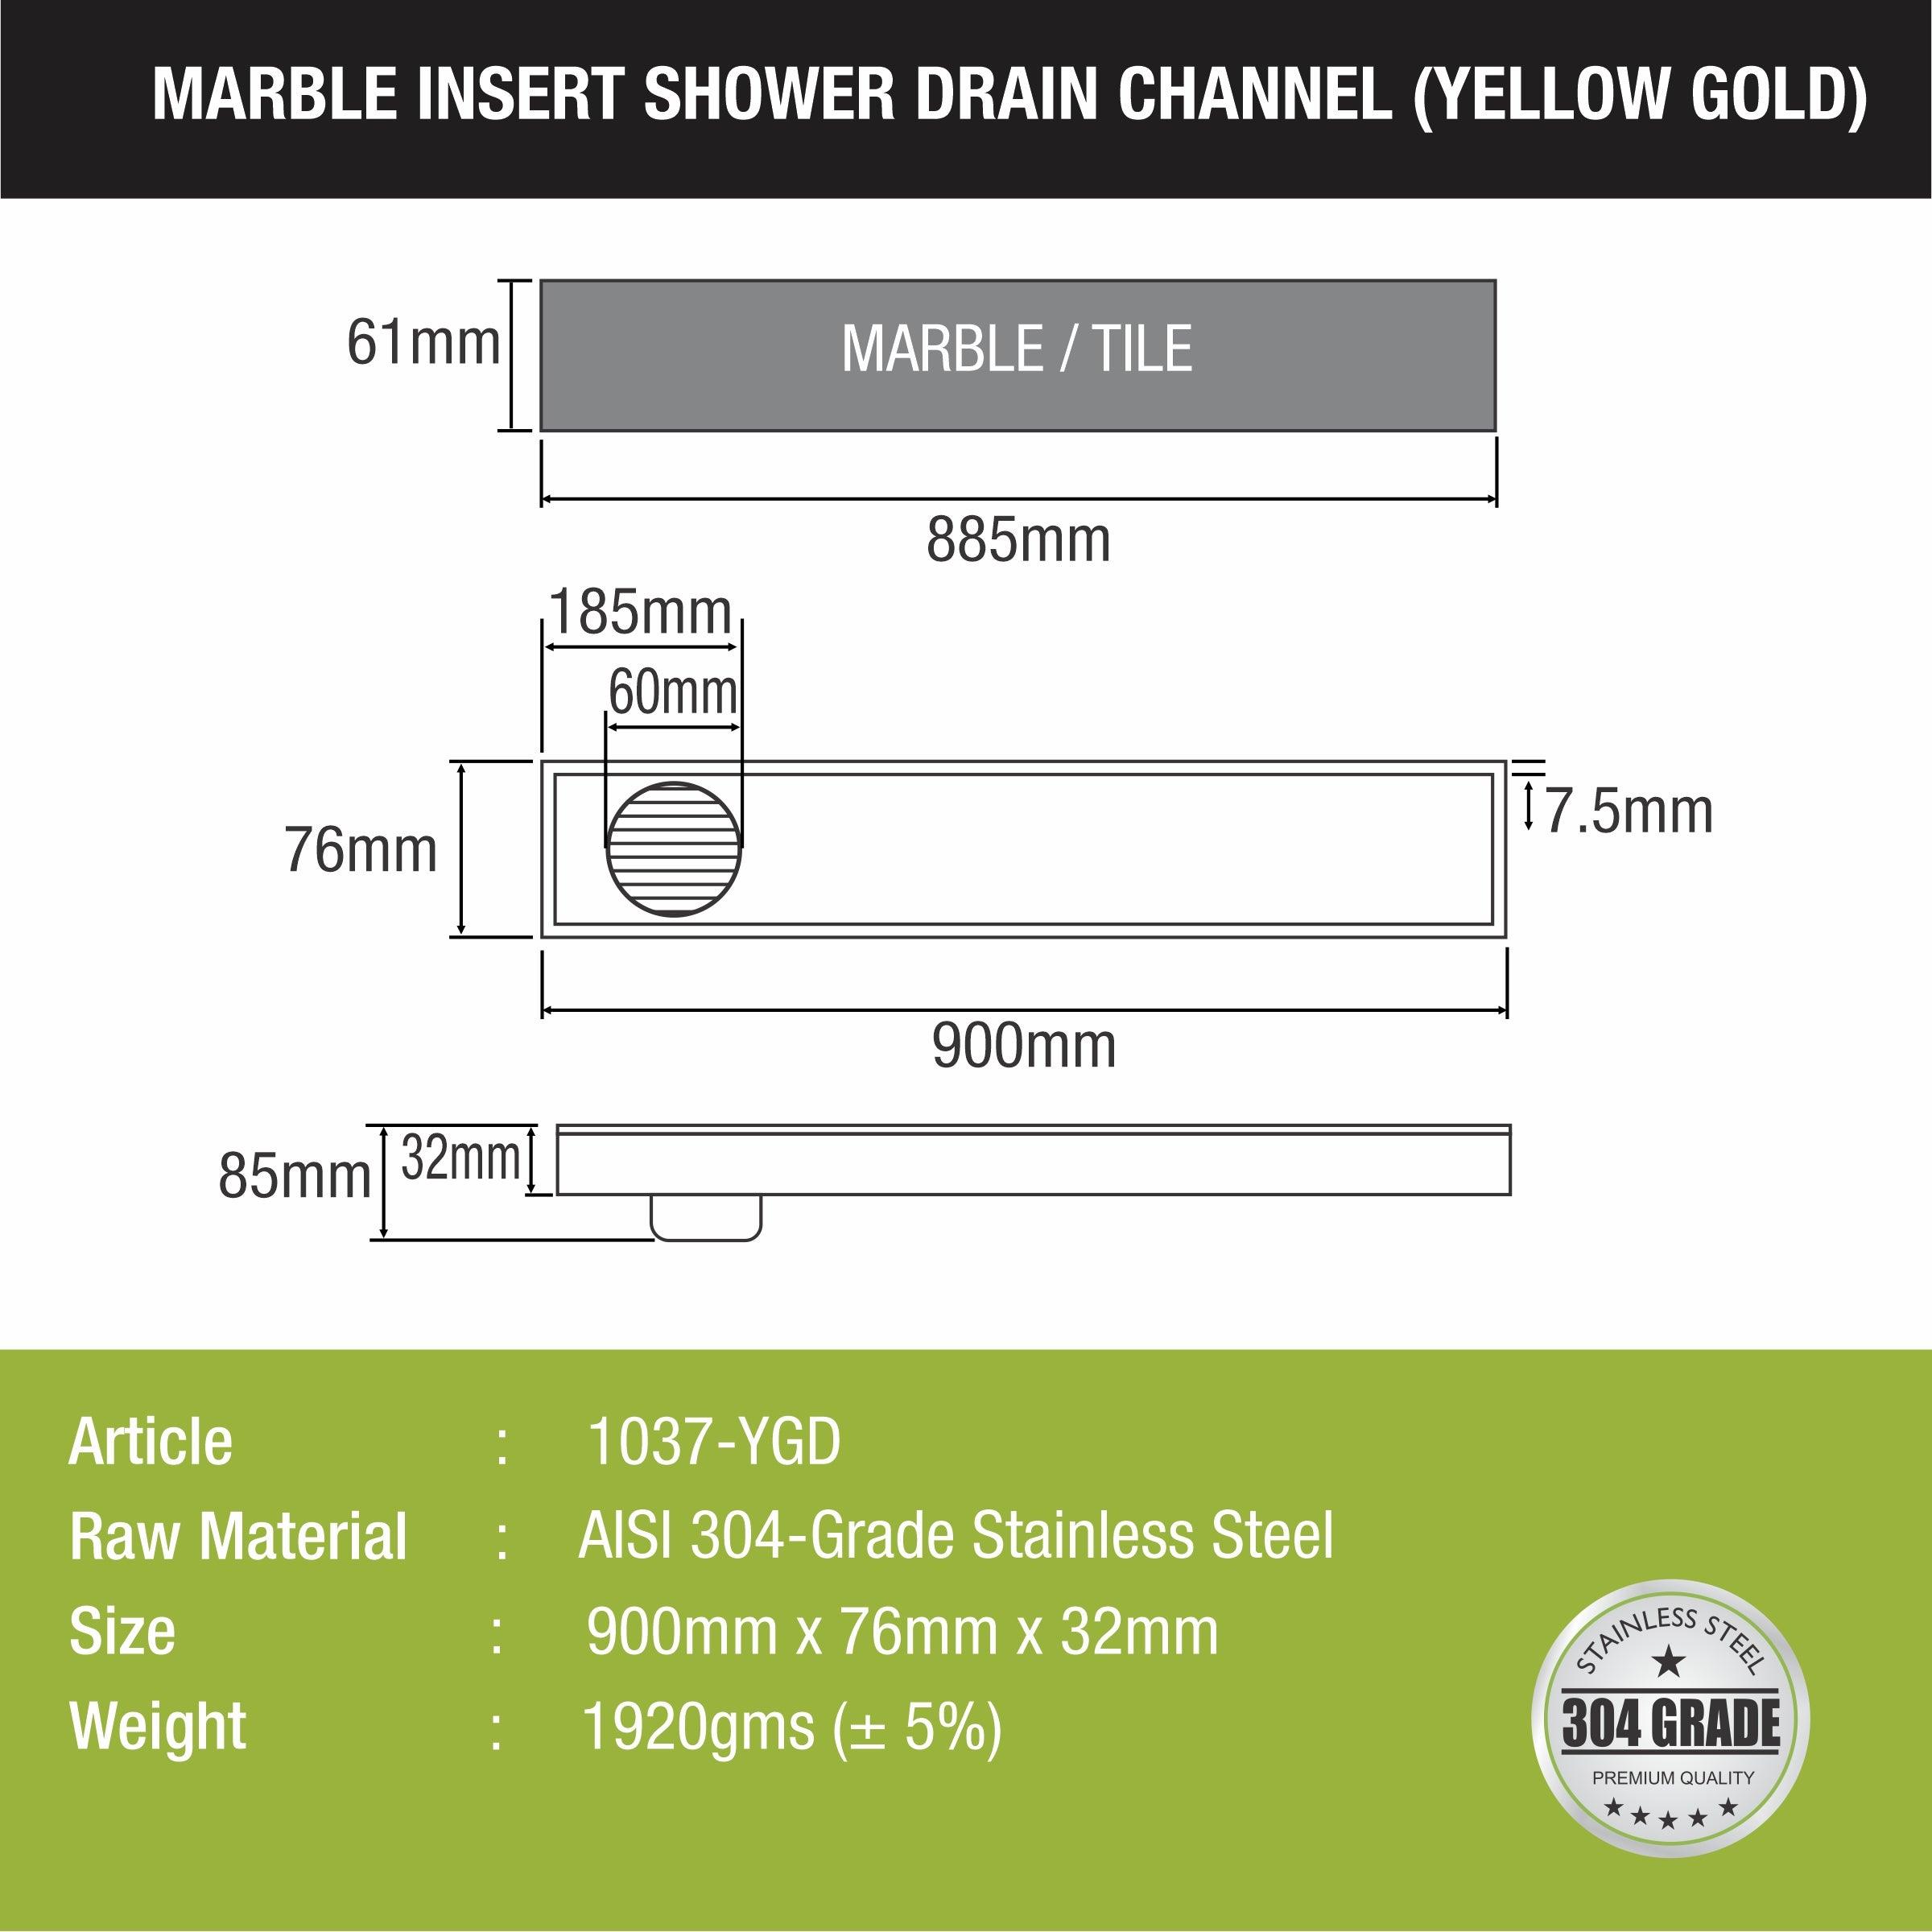 Marble Insert Shower Drain Channel - Yellow Gold (36 x 3 Inches) sizes and dimensions